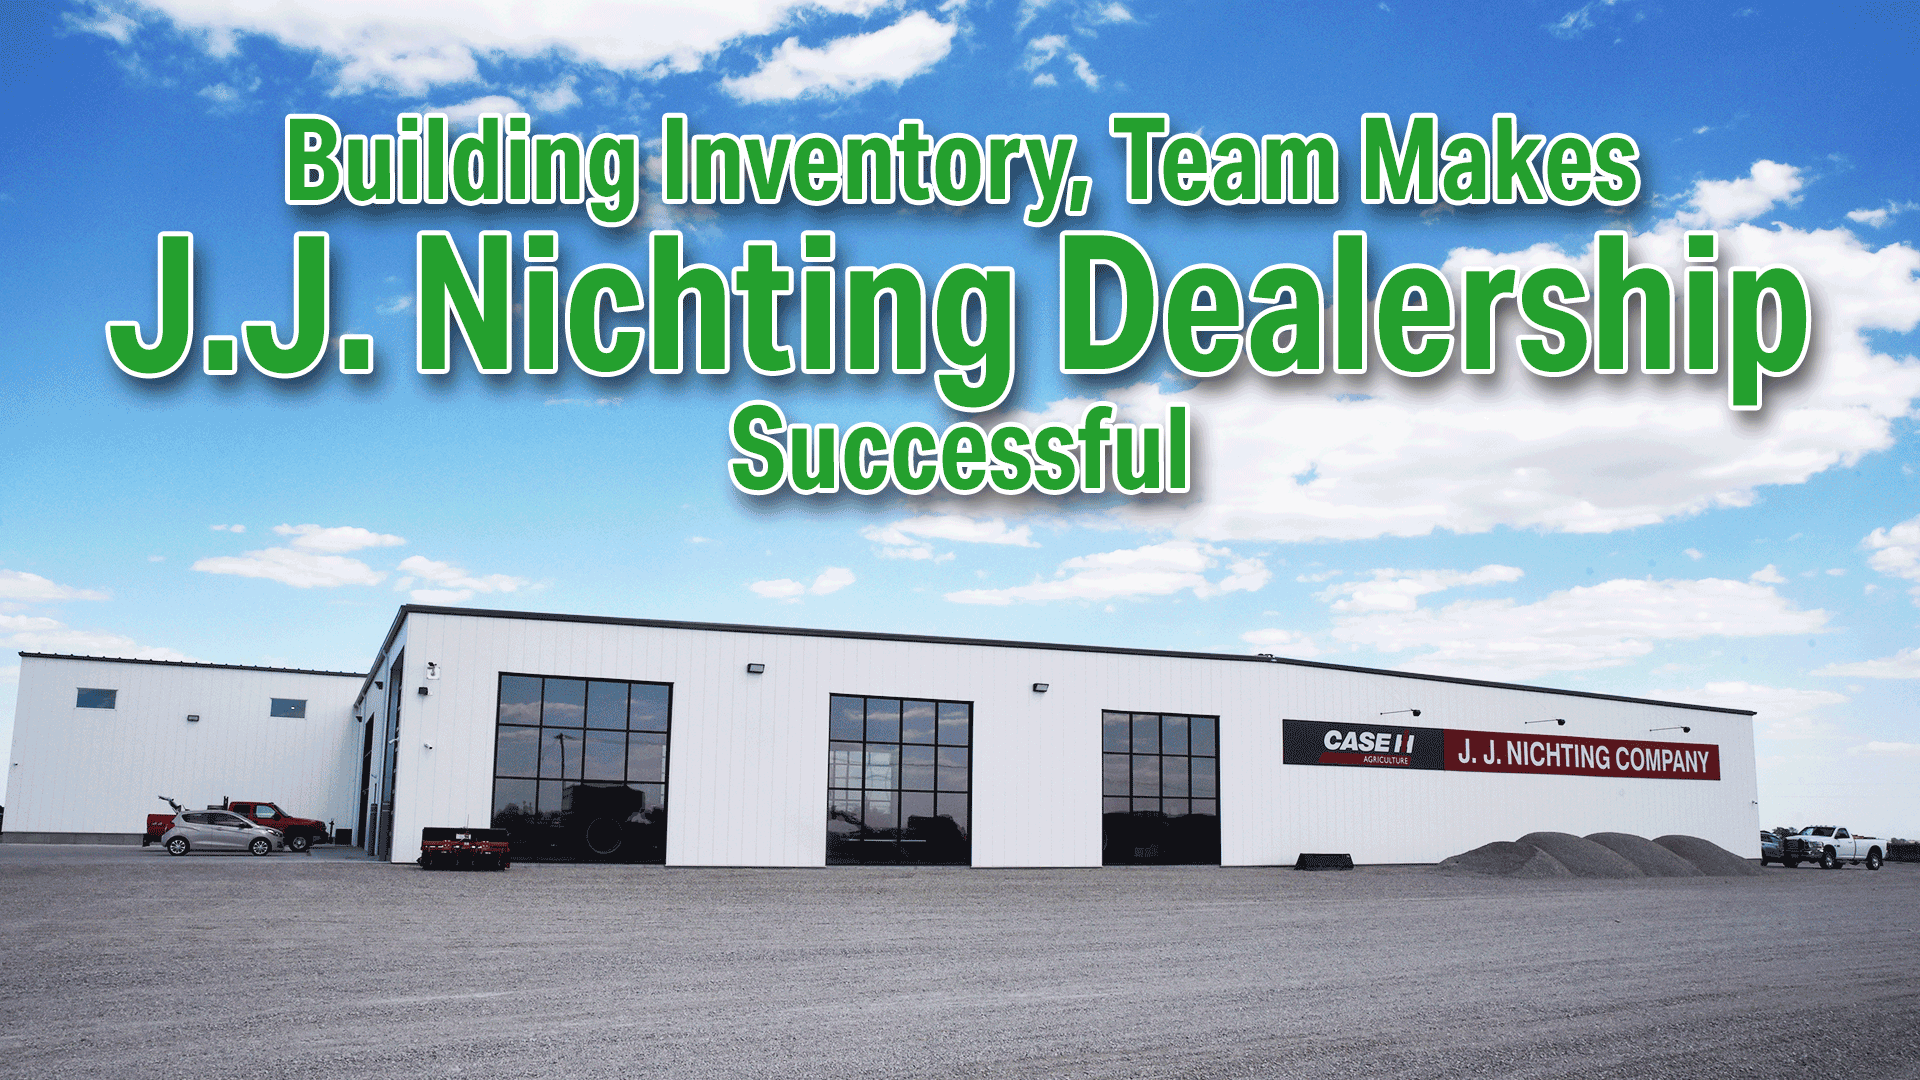 Building-Inventory-Team-Makes-JJ-Nichting-Dealership-Successful.png